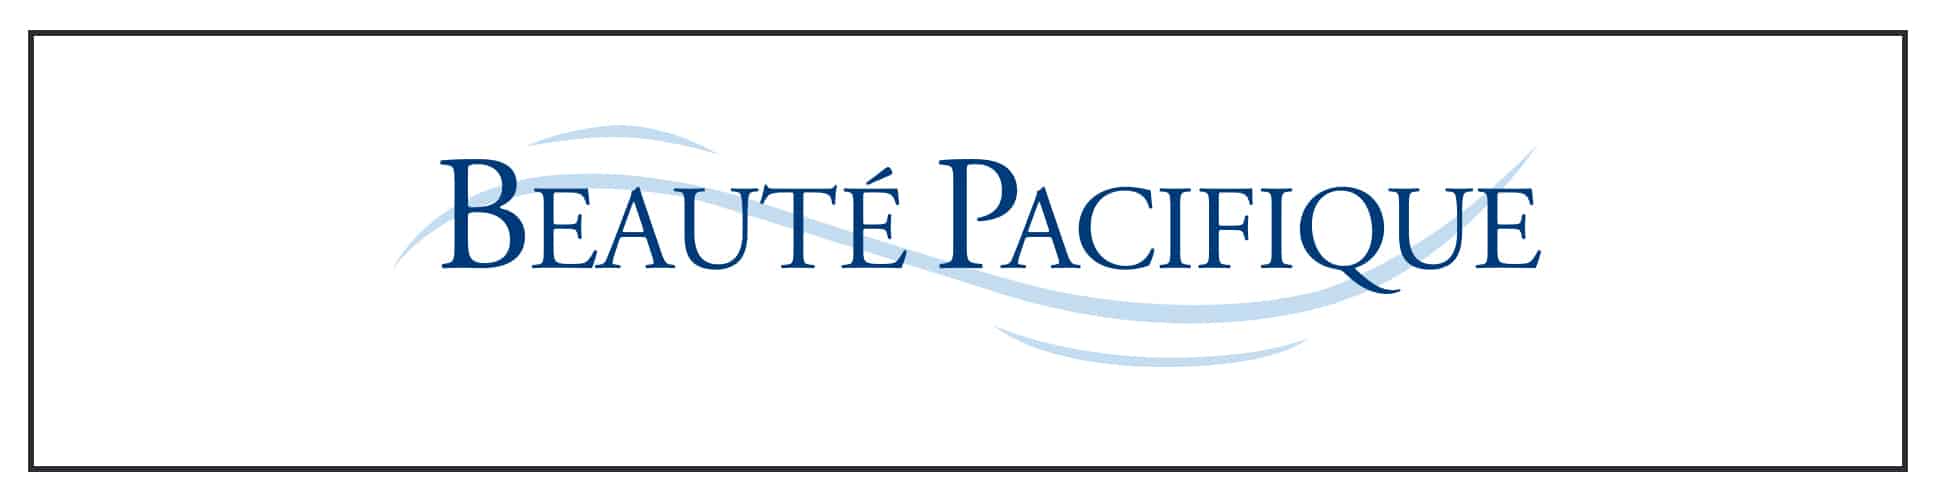 Beaute pacifice logo on a white background.